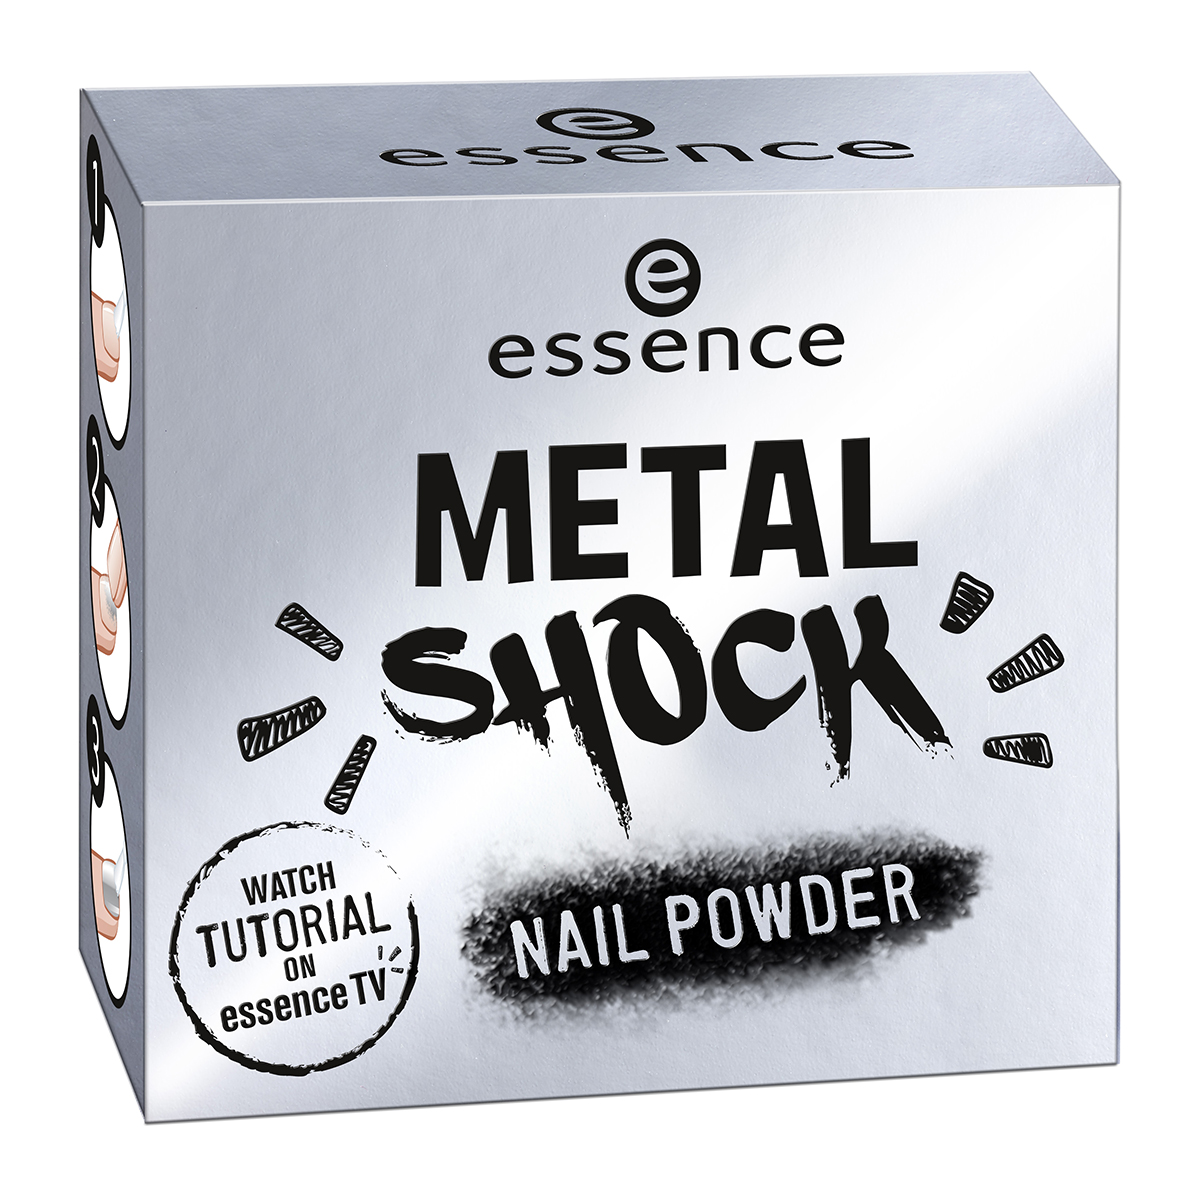 Mirror Nails Essence Metal Shock | Deluxe Nails Sely - YouTube